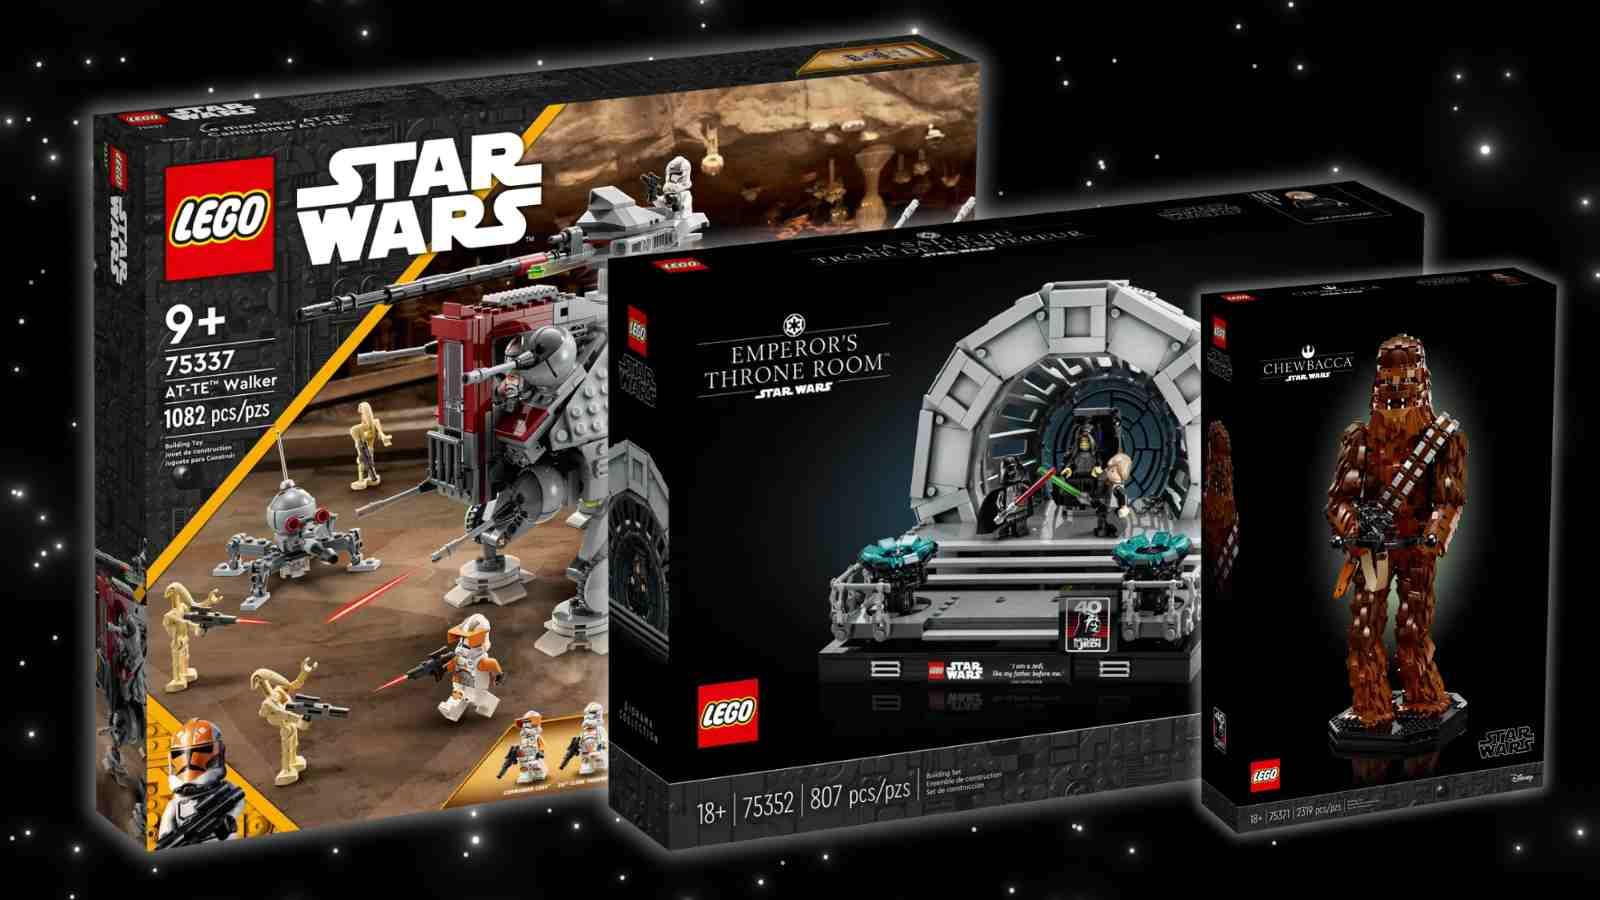 Three of the LEGO Star Wars sets offered at discounted prices